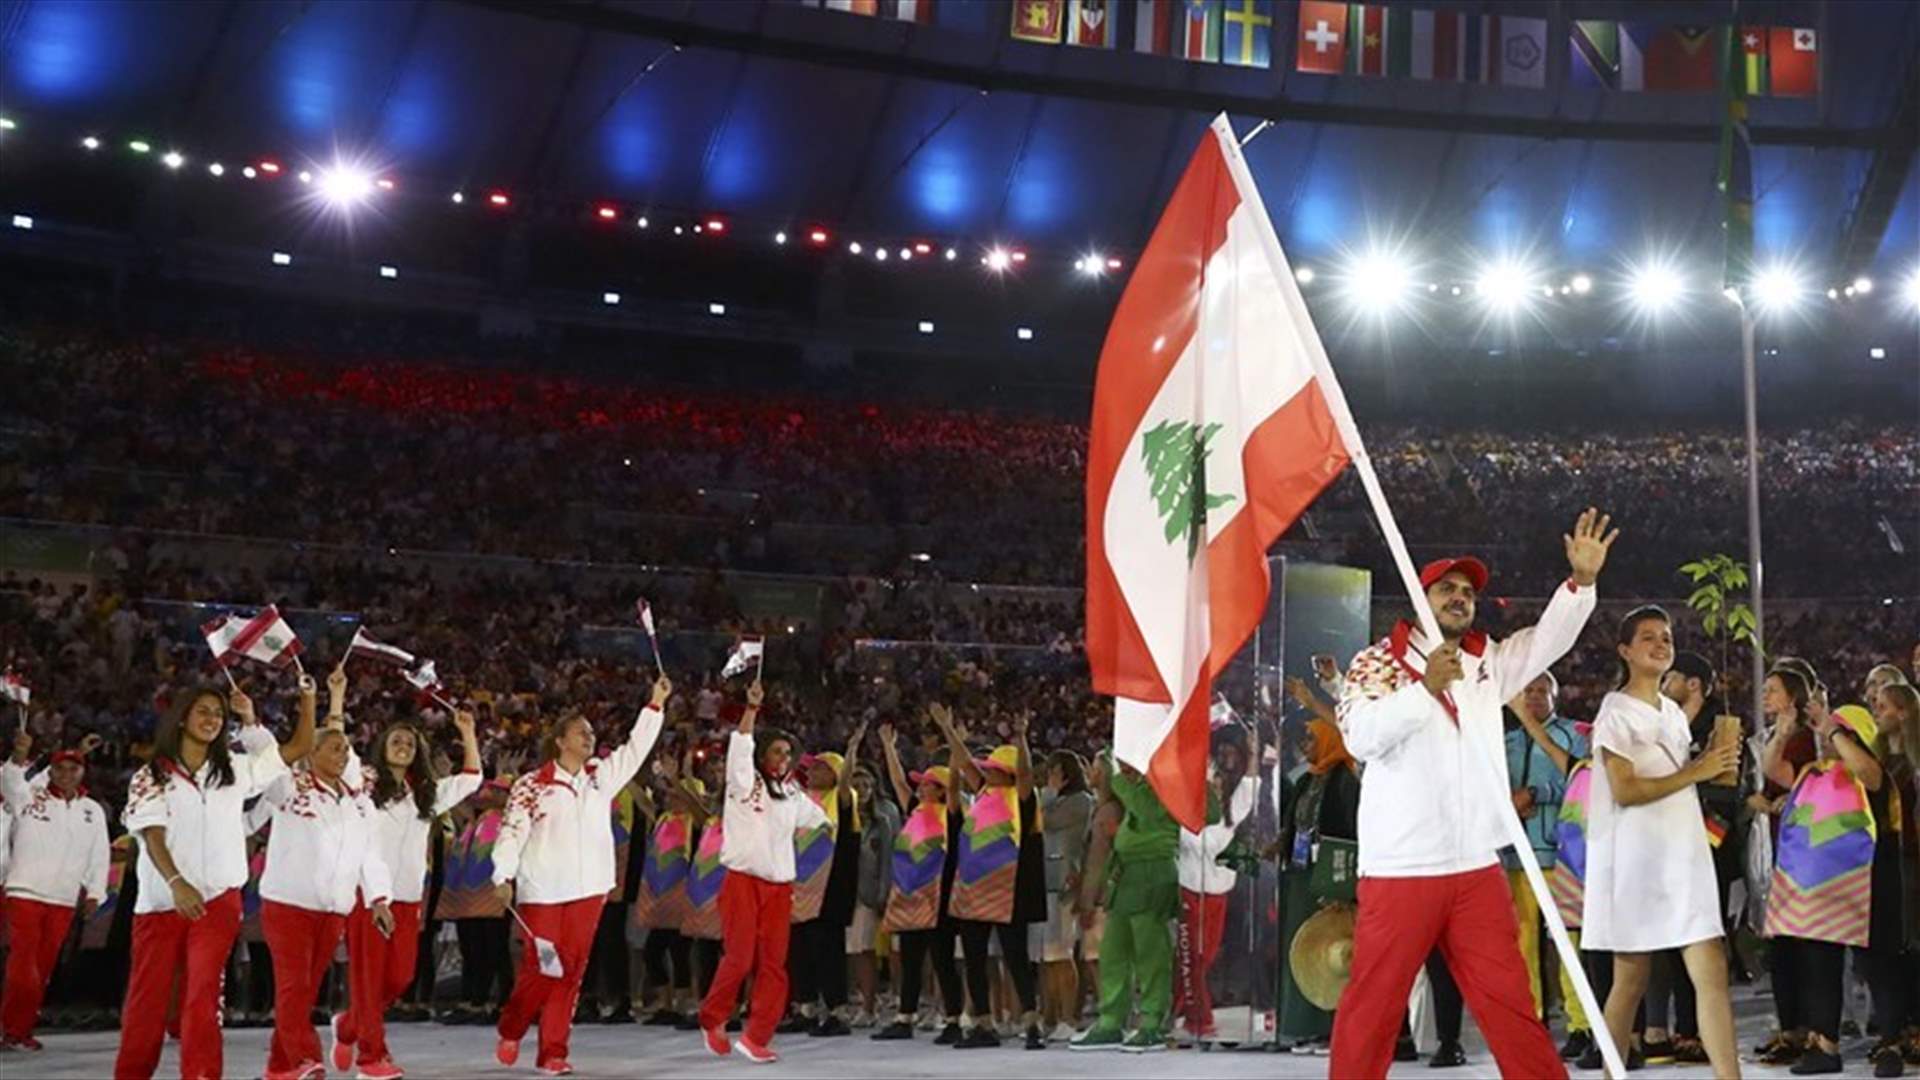 Lebanese athletes refuse to travel with Israeli delegation in Rio on same bus